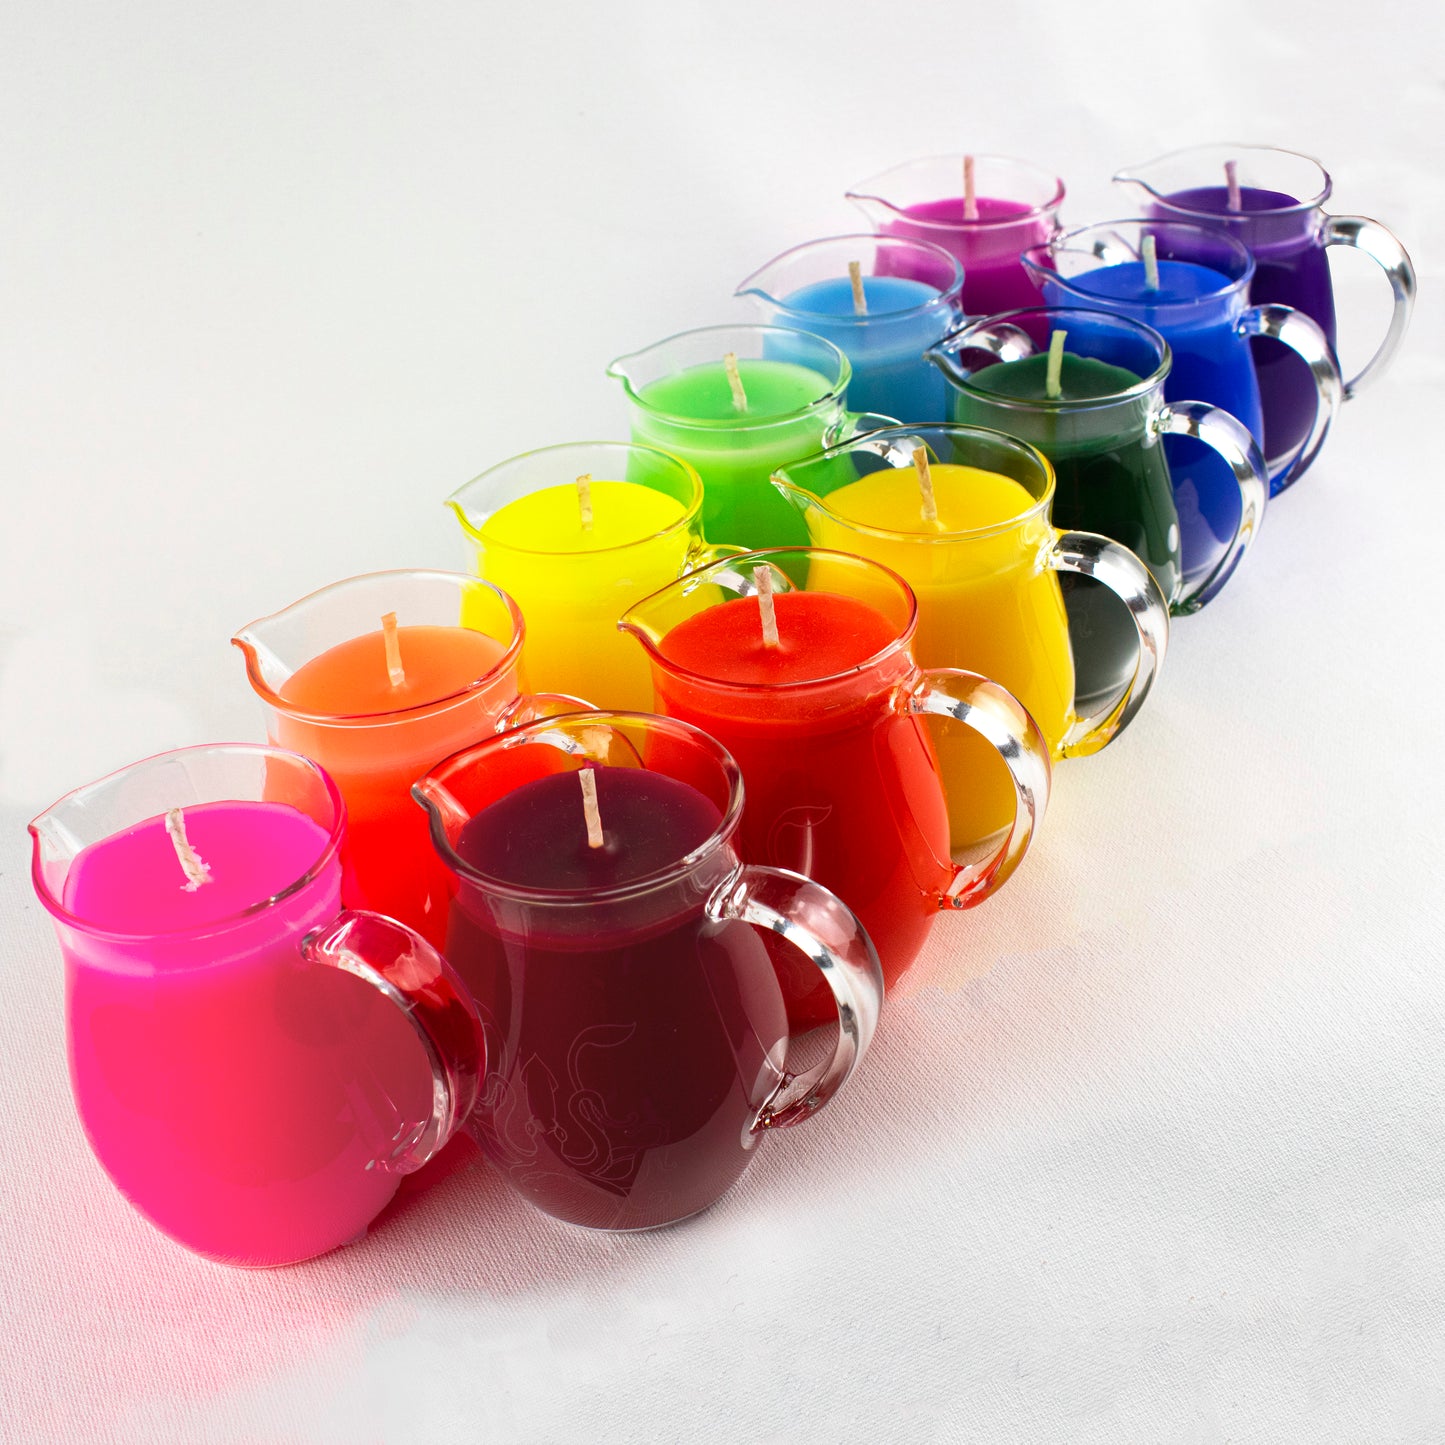 Classic Wax Play Pitcher Candle - Low Temp - Χωρίς άρωμα - Παραφίνη